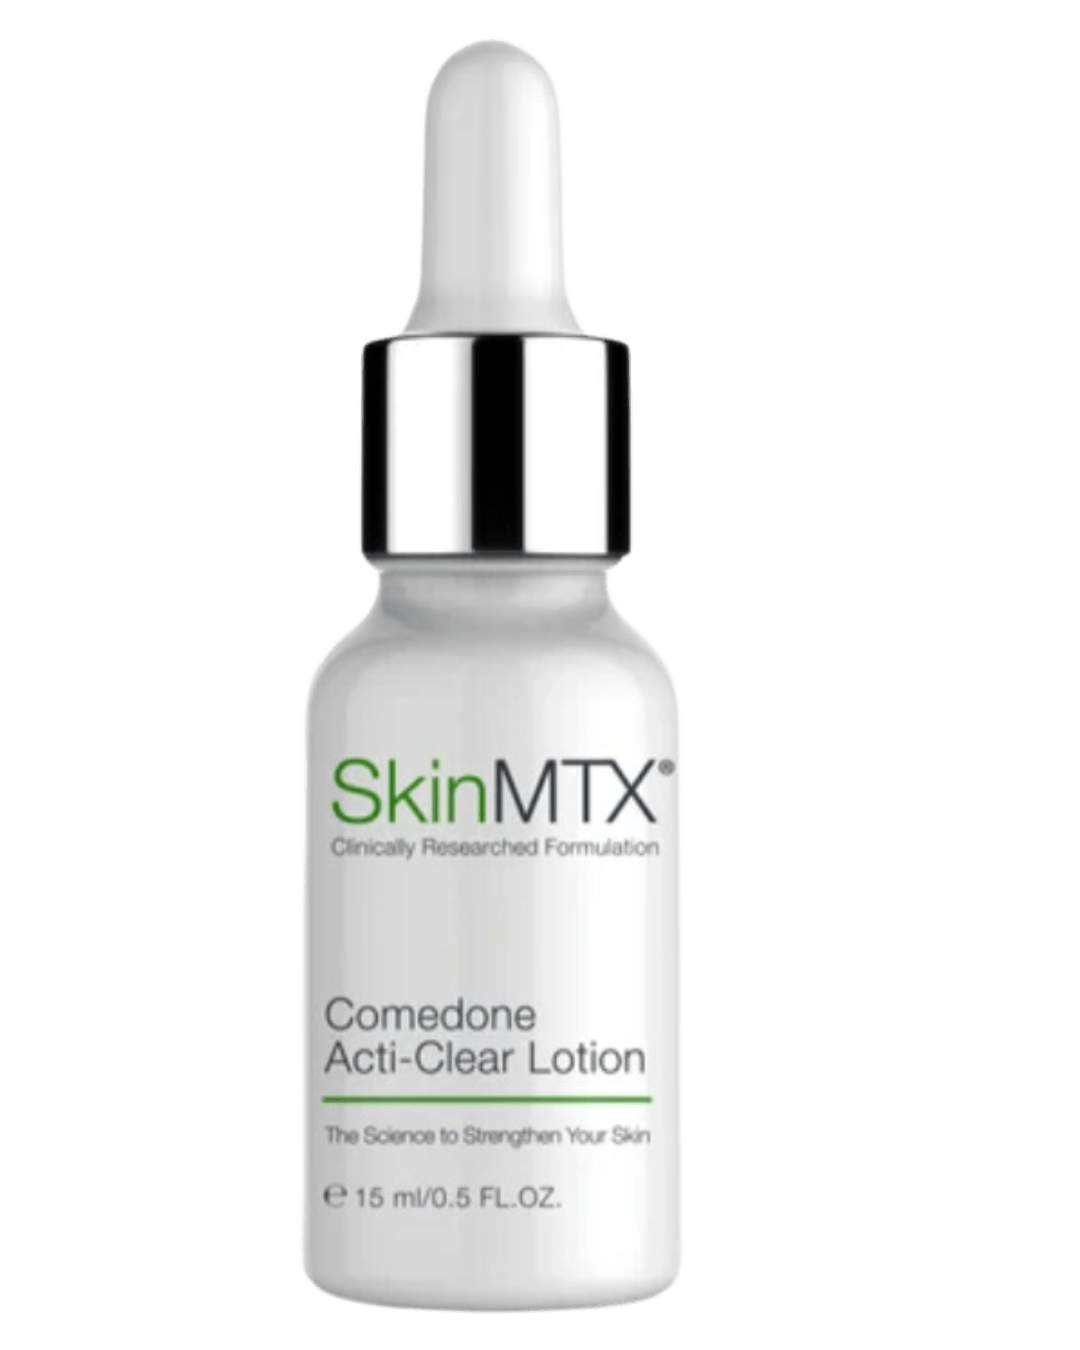 Daily Vanity Beauty Awards 2024 Best Skincare SkinMTX Comedone Acti-Clear Lotion Voted By Beauty Experts